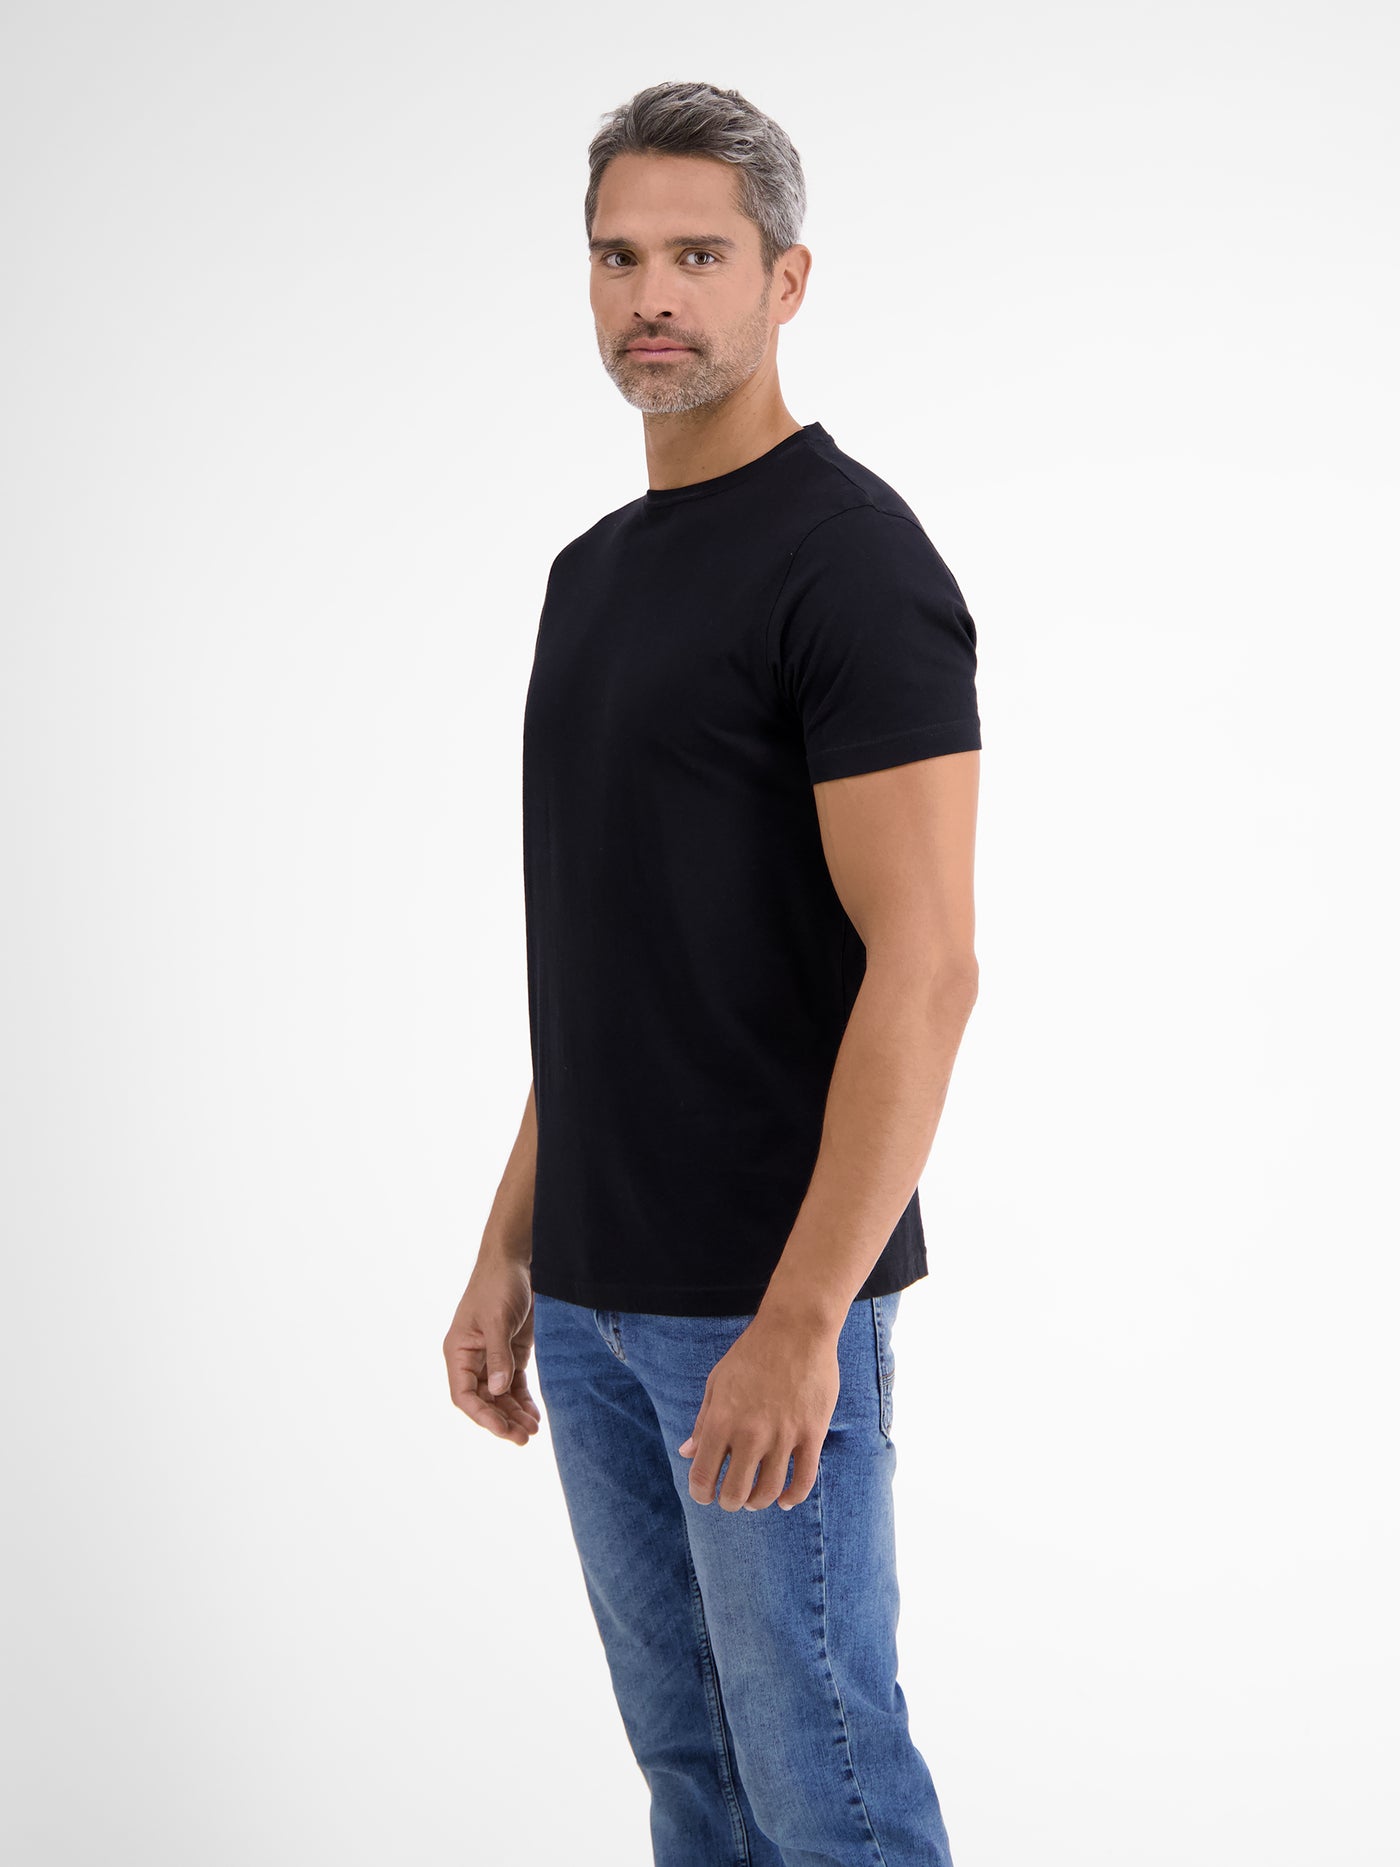 Double pack of t-shirts for men, round neck in premium cotton quality